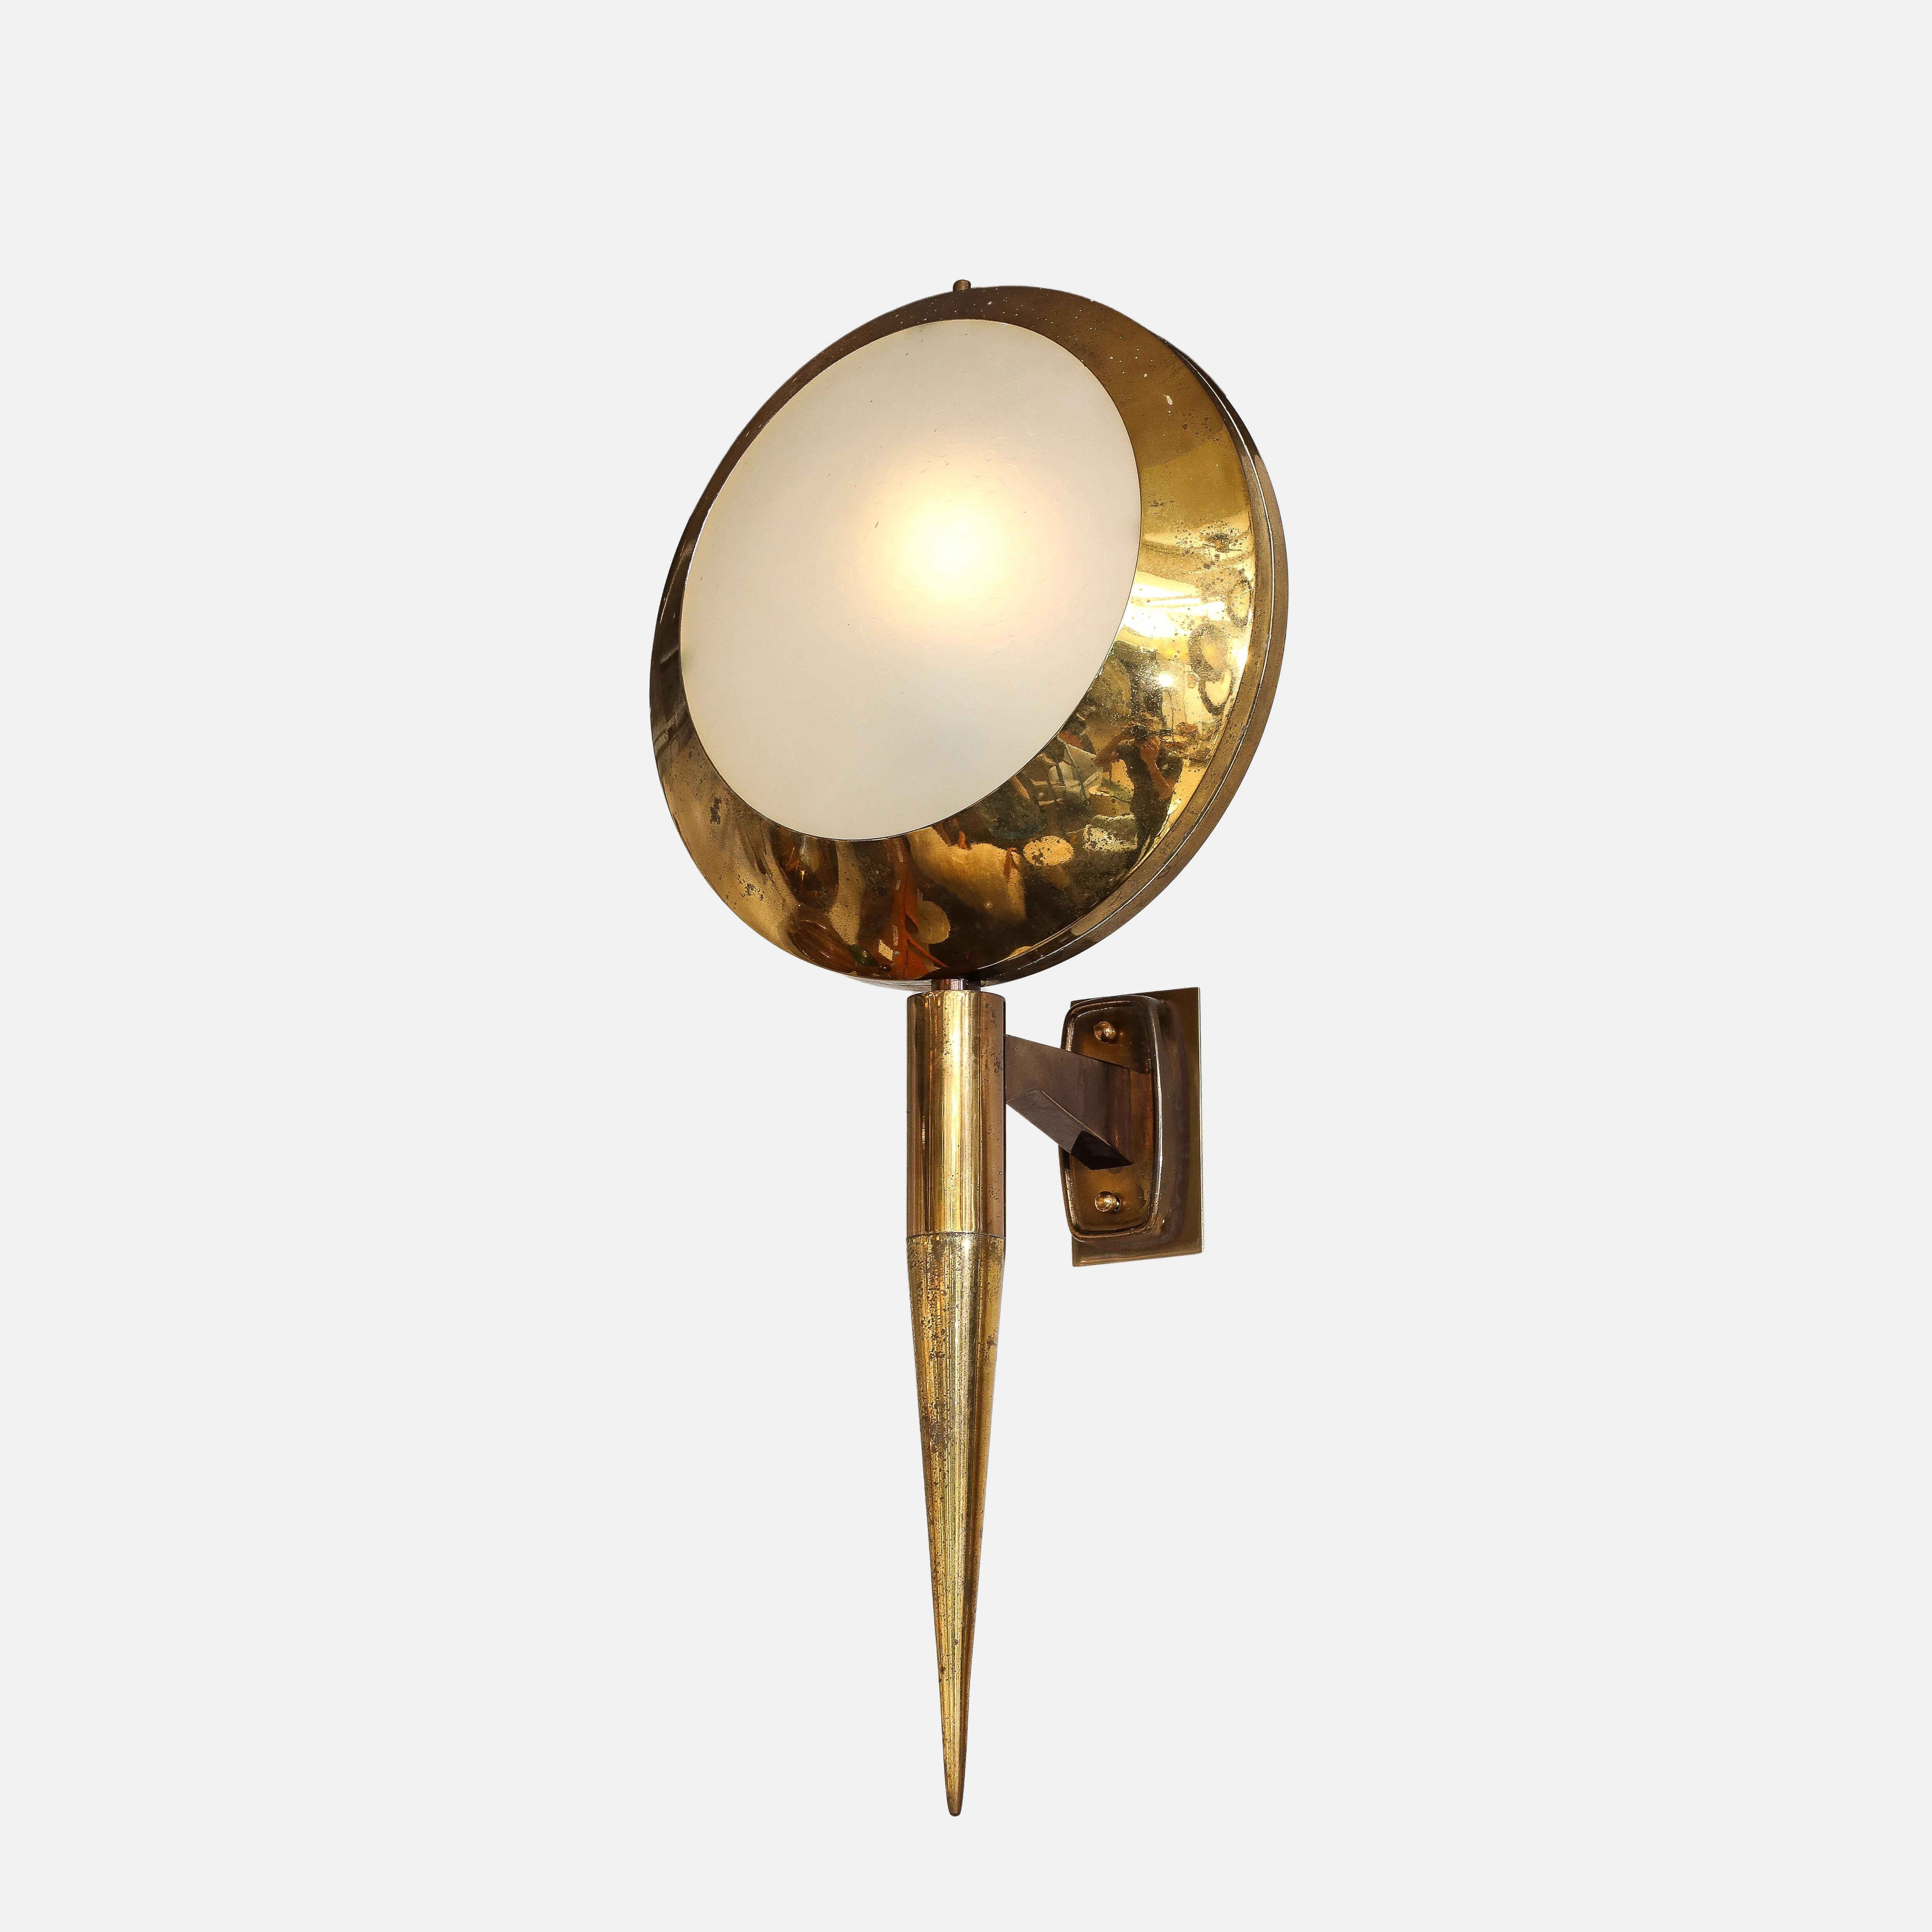 Italian Stilnovo Rare Large Pair of Sconces Model 2128 in Brass and Glass, 1950s For Sale